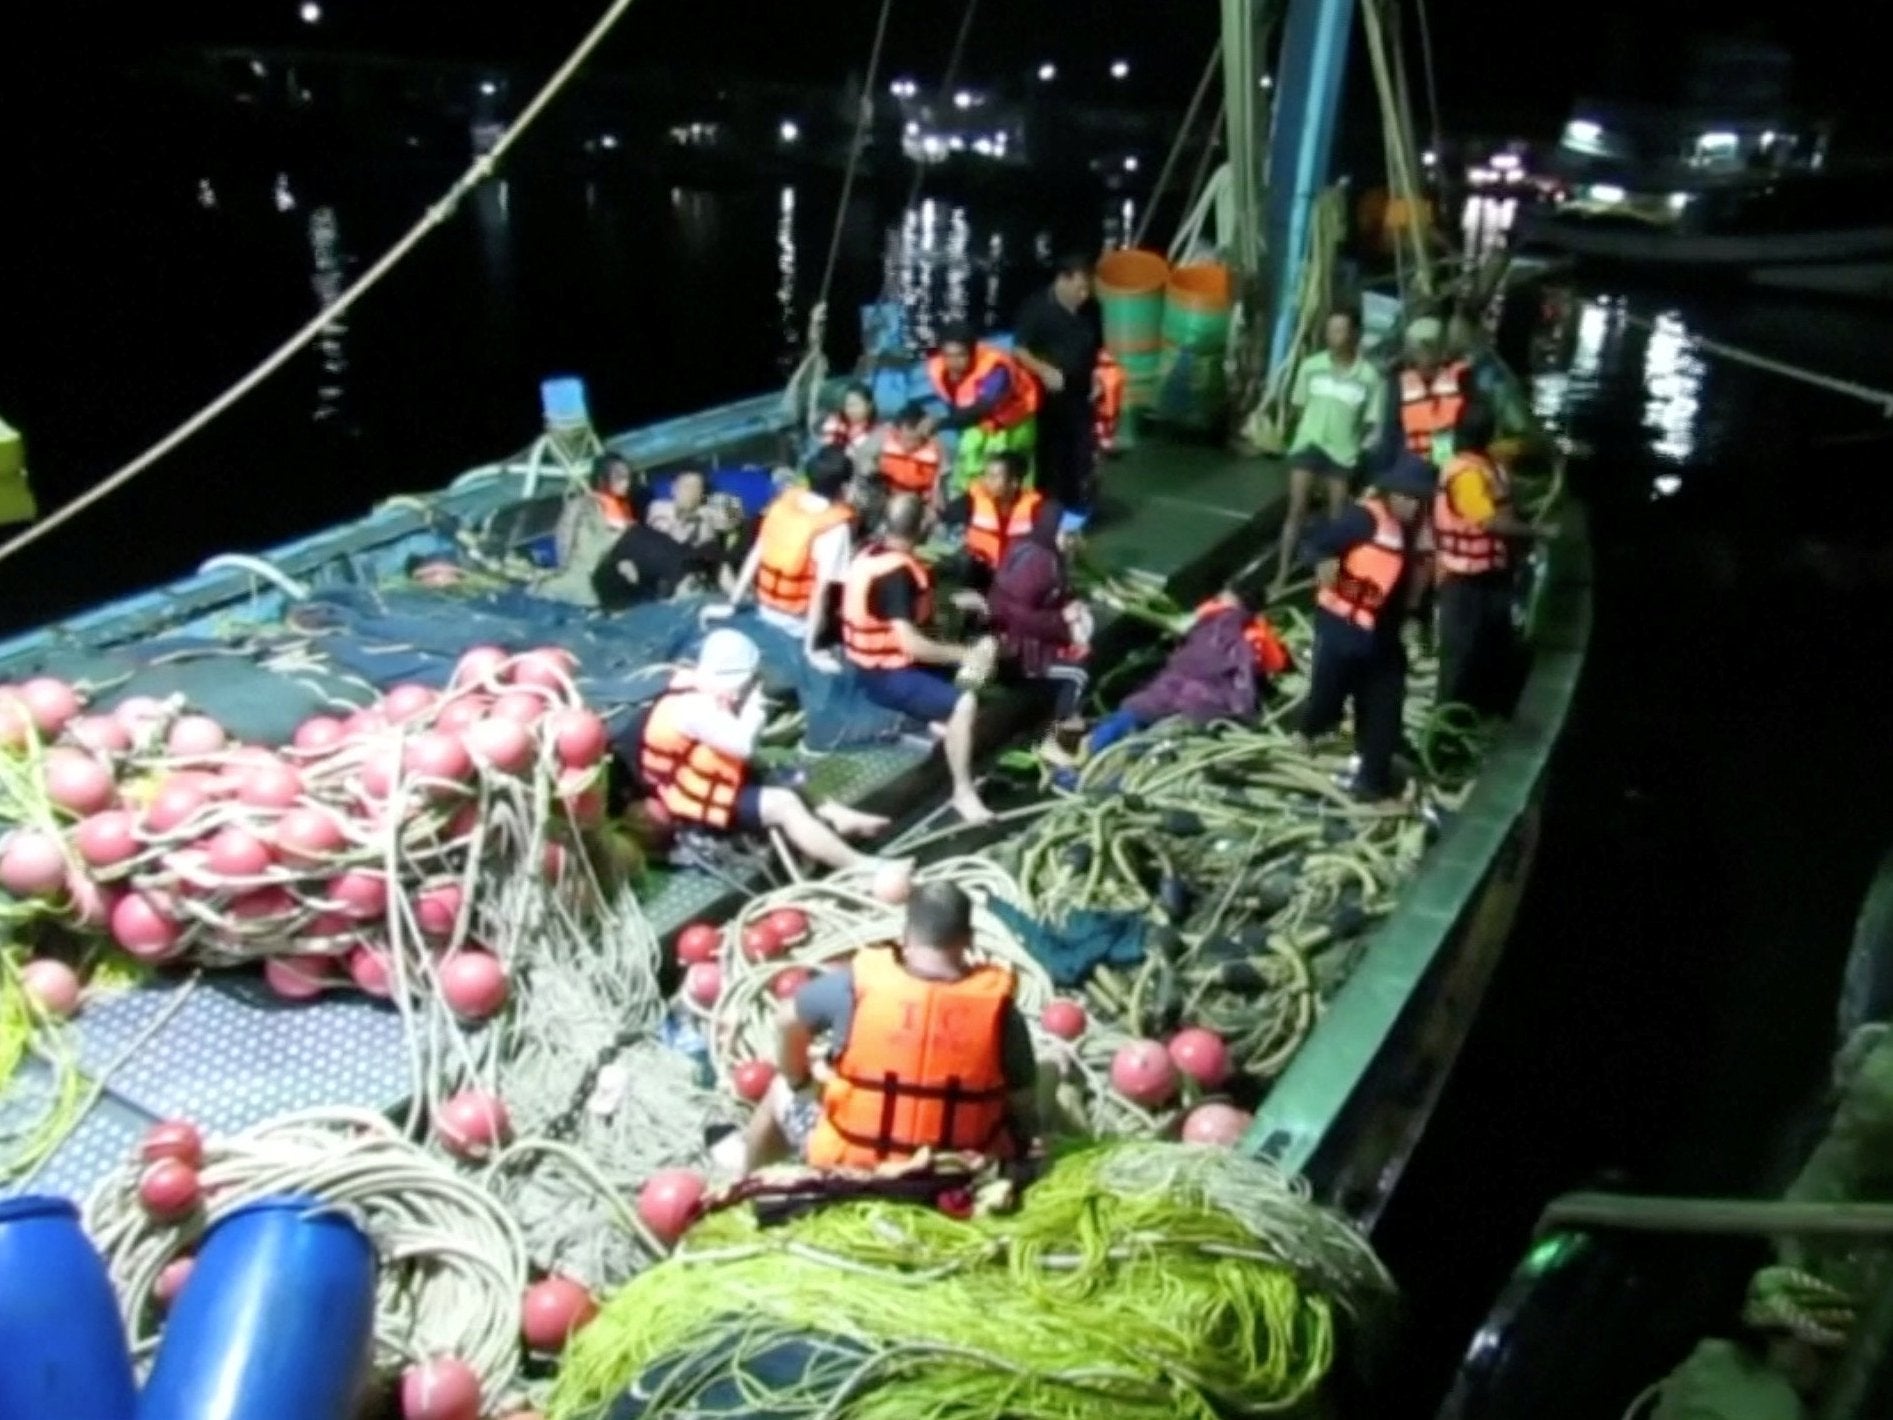 Rescued people in life jackets sit on a fishing boat after a boat they were travelling in capsized off Phuket